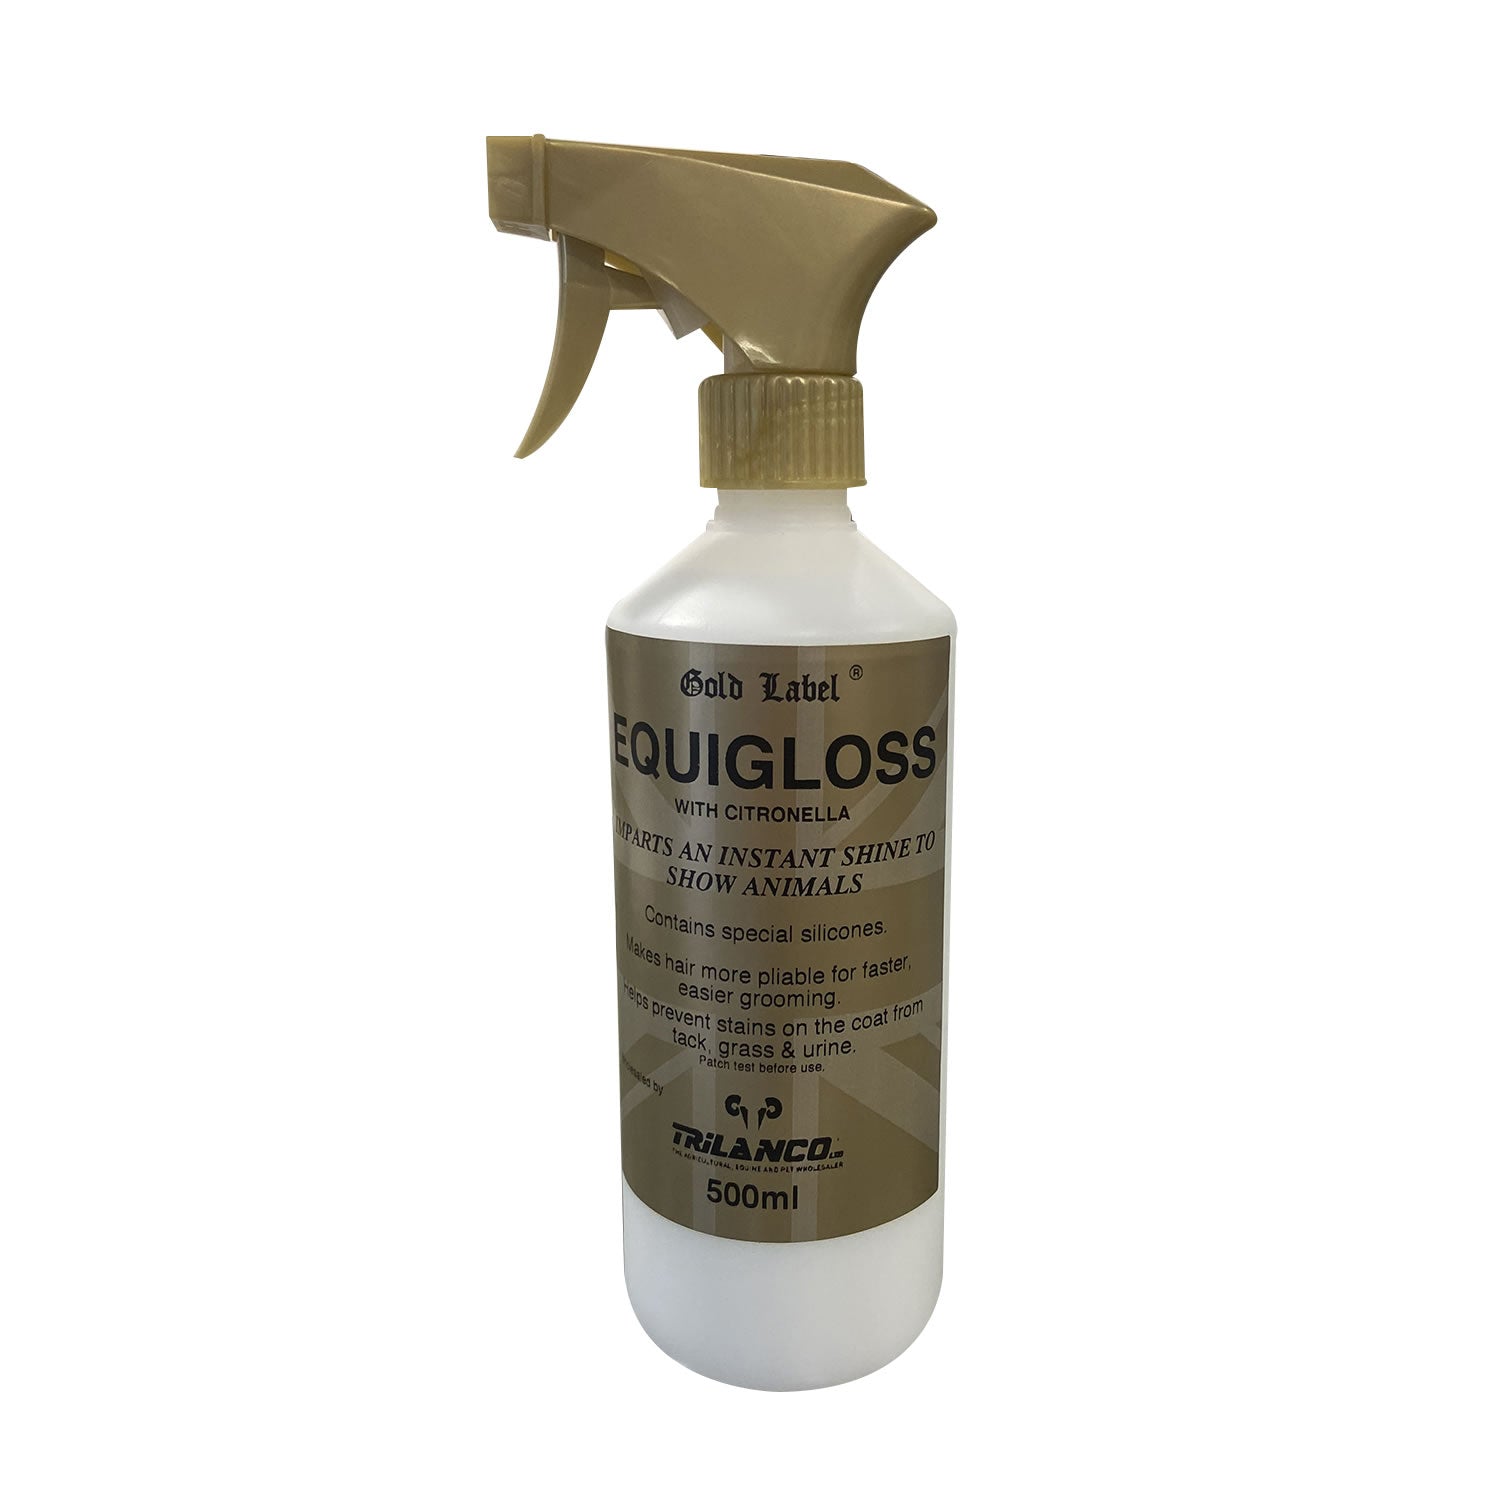 Gold Label Equigloss Spray For Coats - 500ml